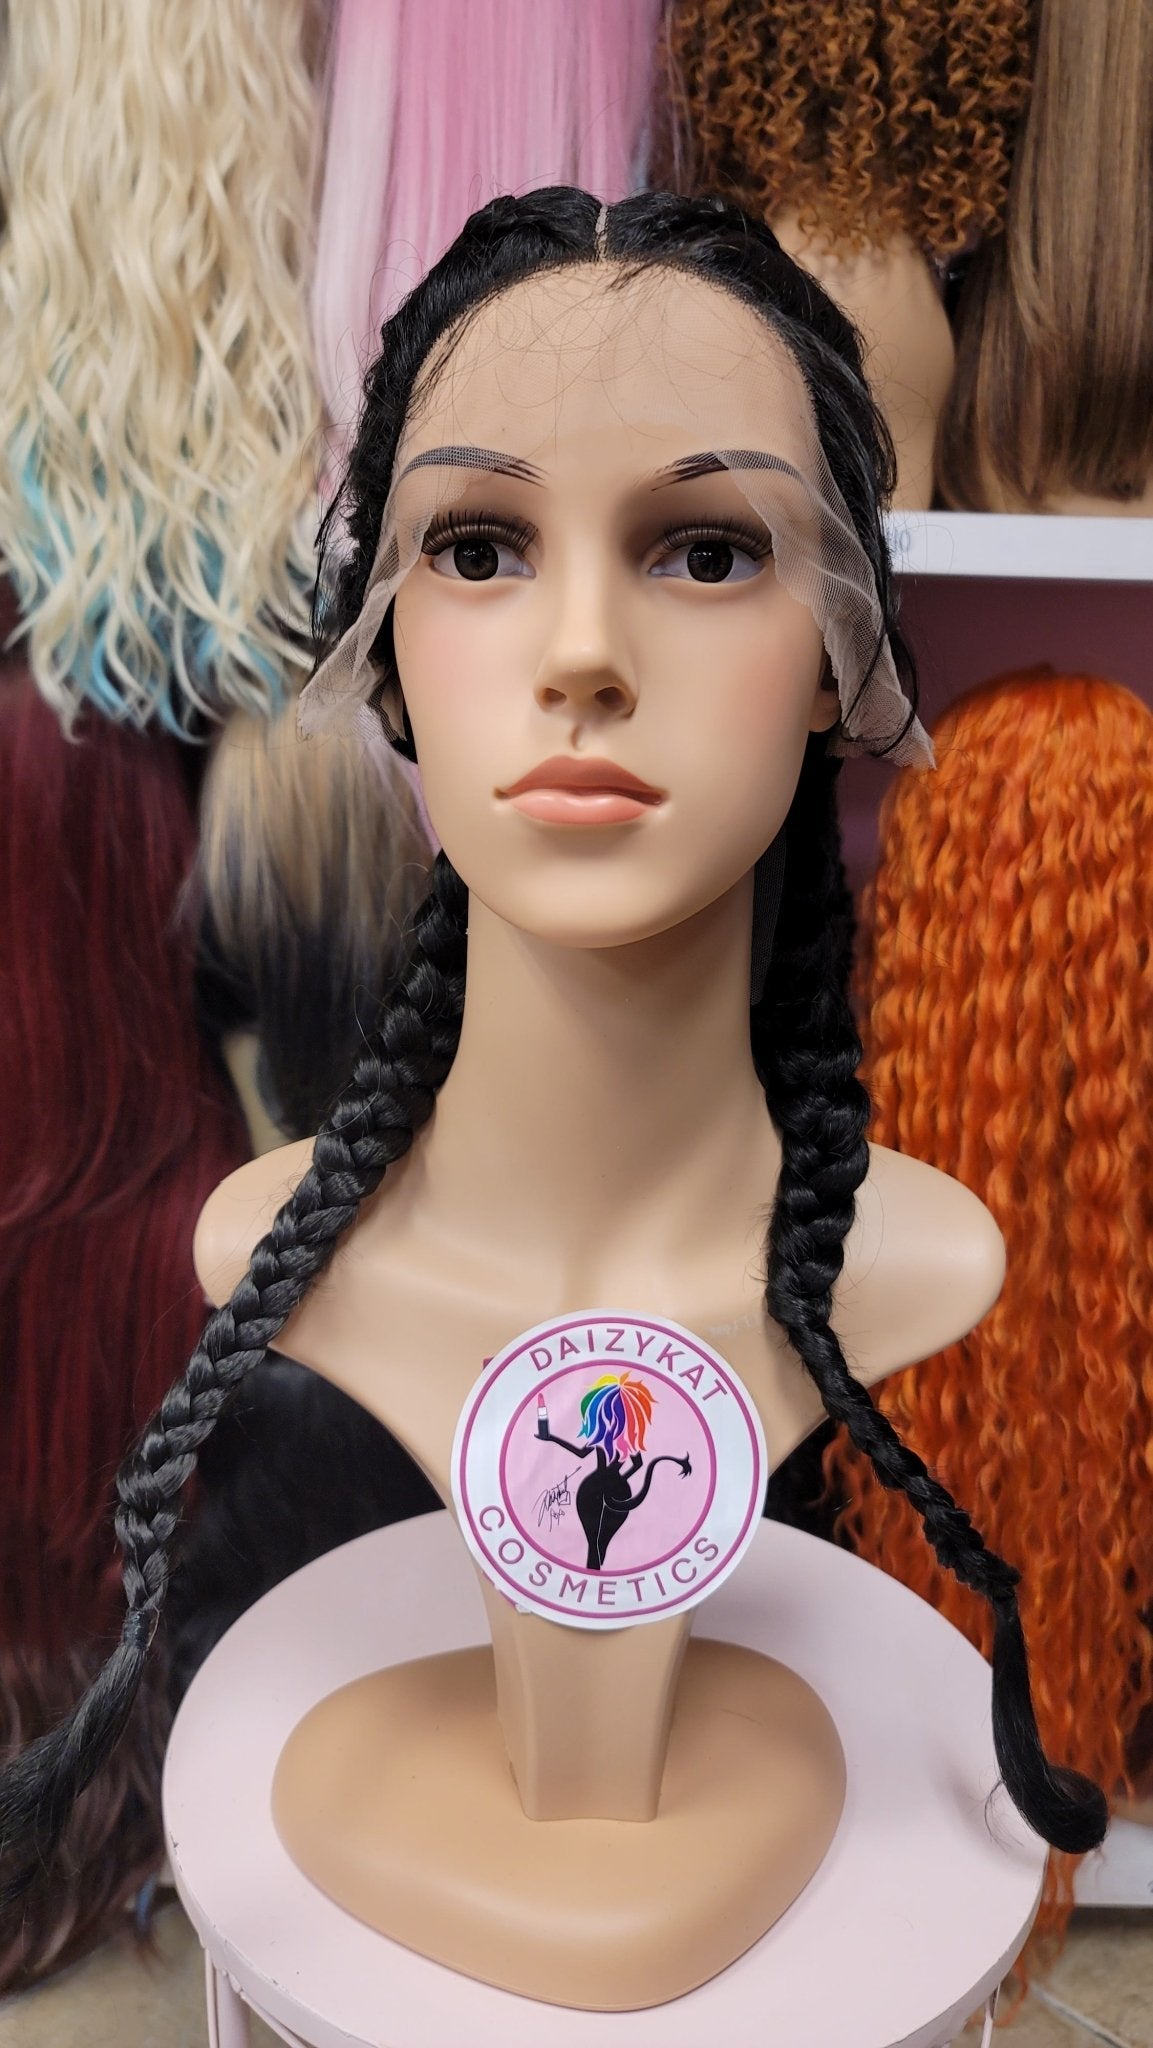 410 Cici - Braided Middle Part Lace Front Wig - 1B - DaizyKat Cosmetics 410 Cici - Braided Middle Part Lace Front Wig - 1B DaizyKat Cosmetics Wigs